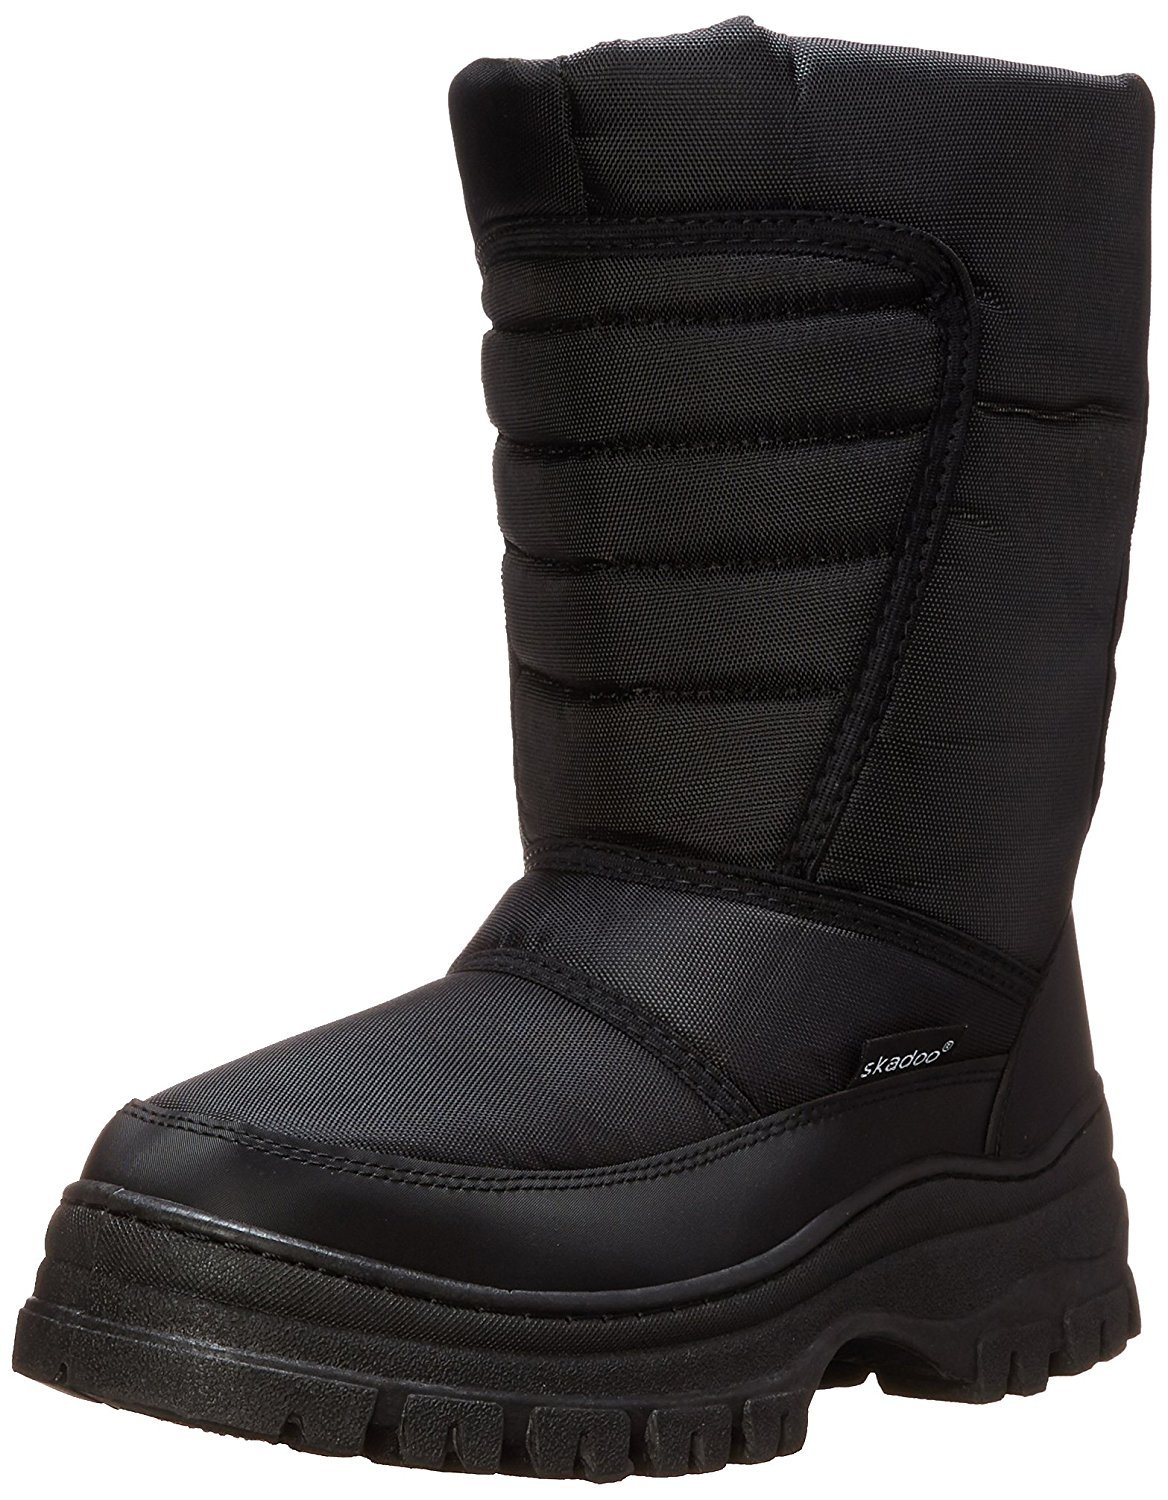 Skadoo Mens Snow Winter Cold Weather Boots | eBay